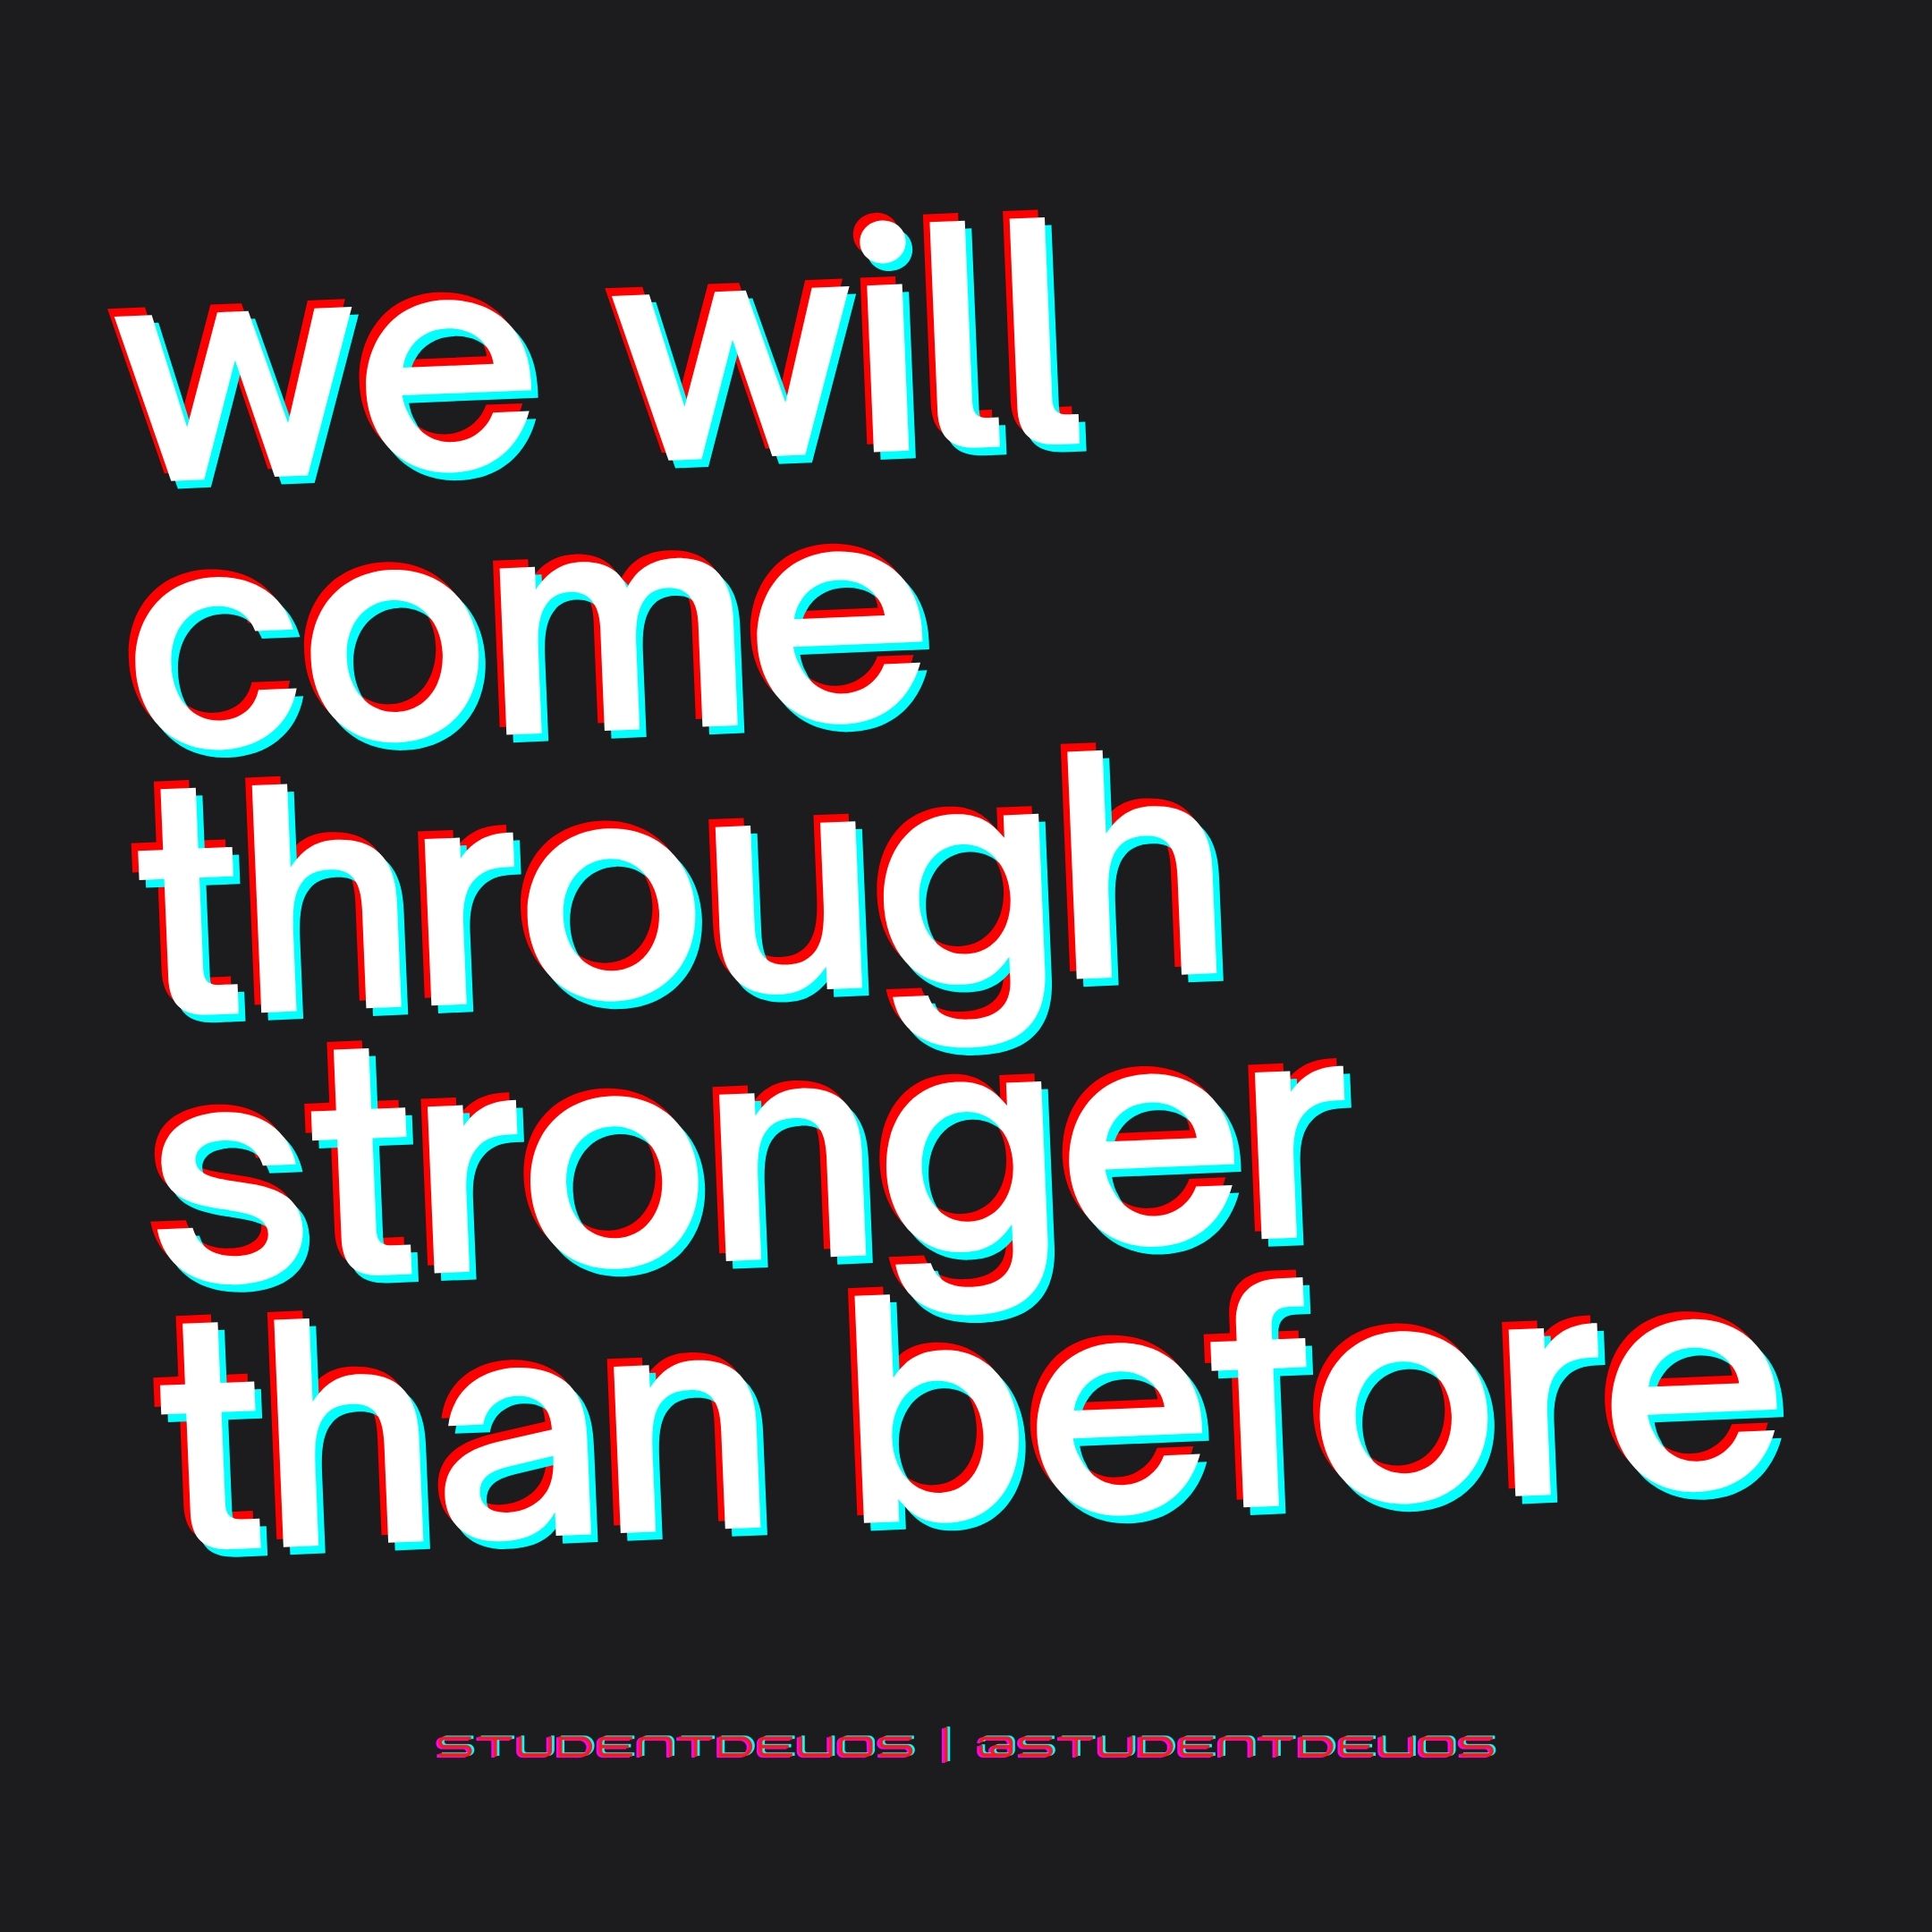 Stronger than before graphic